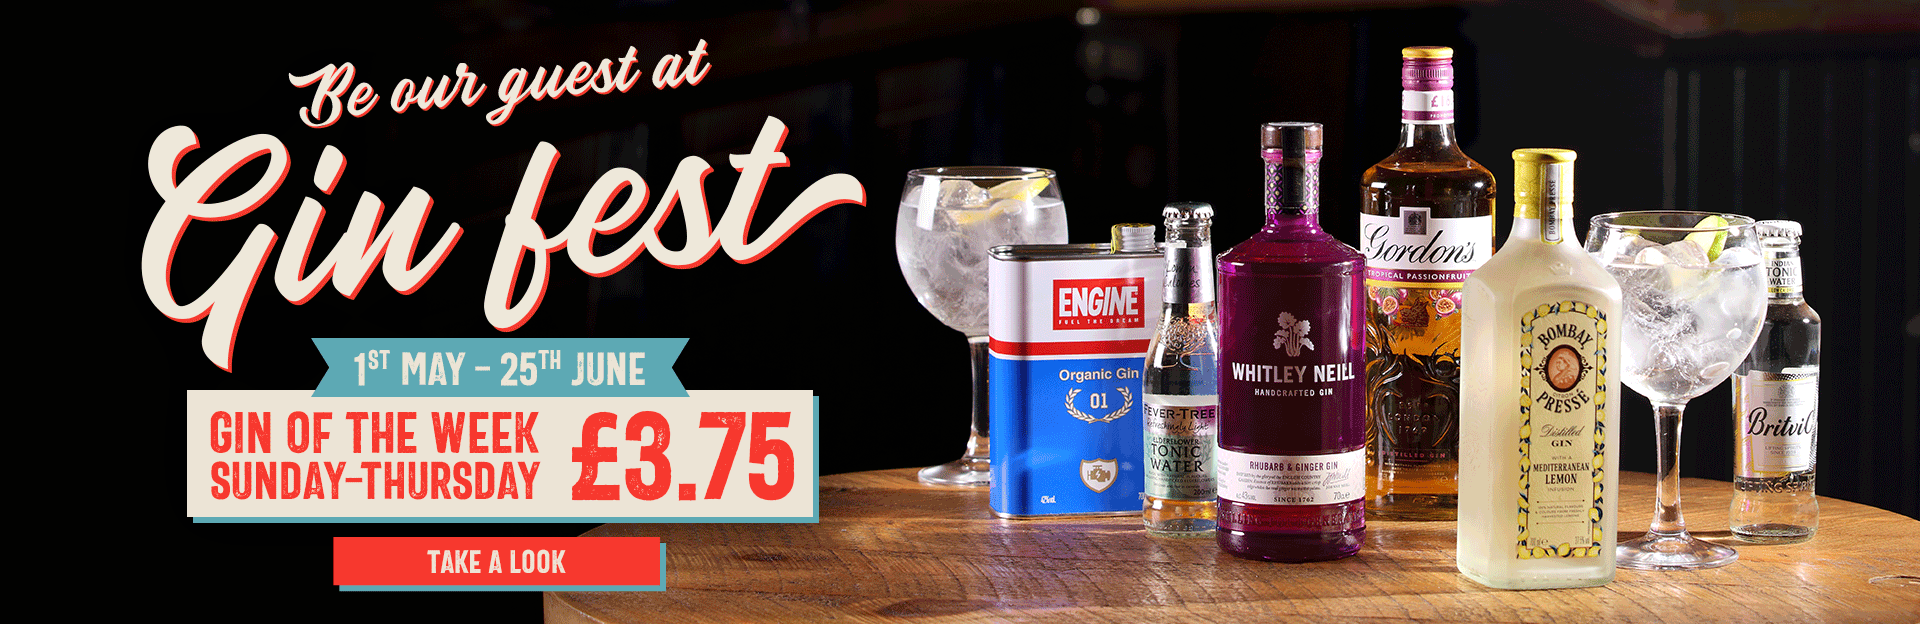 Gin Fest at The Earl Derby